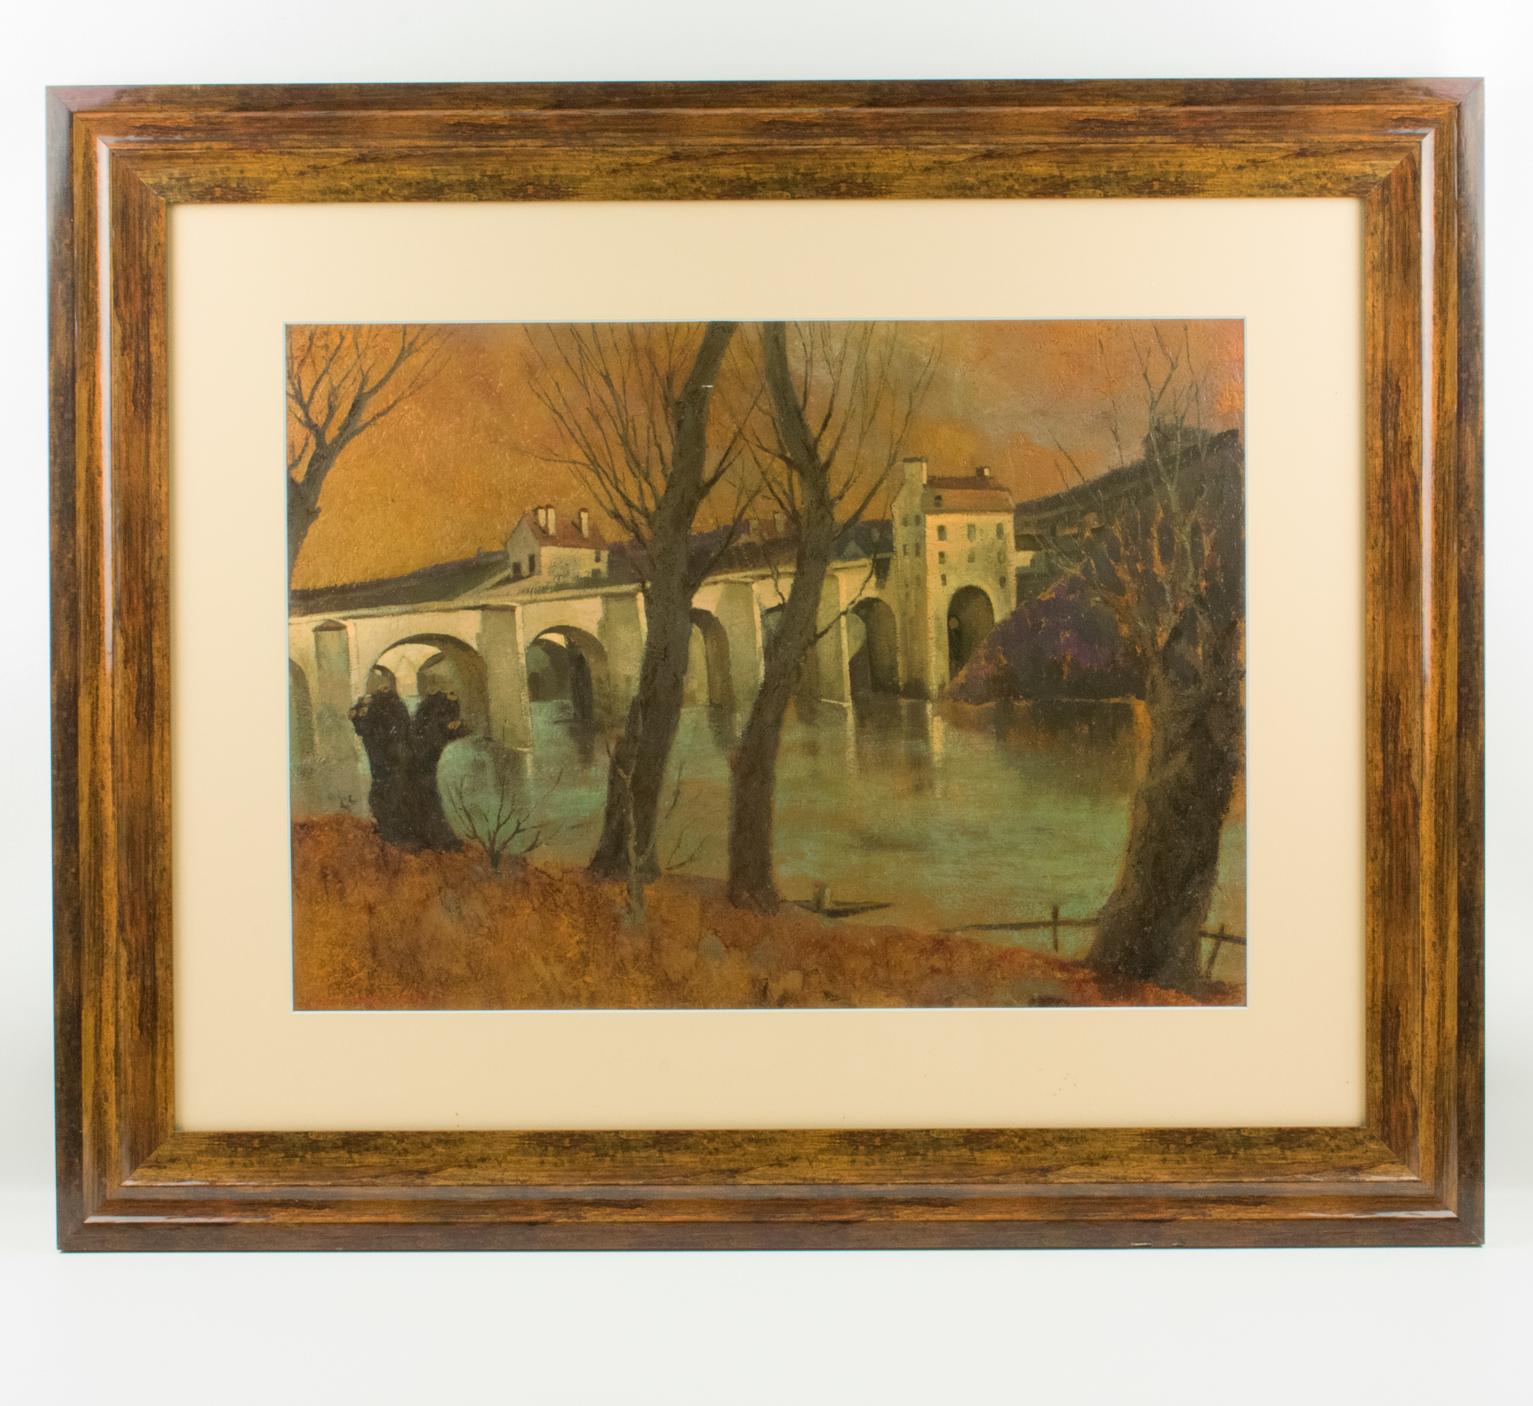 Vaulted Bridge in French Landscape Oil on Wood Painting by Vincent Mazzocchini For Sale 4